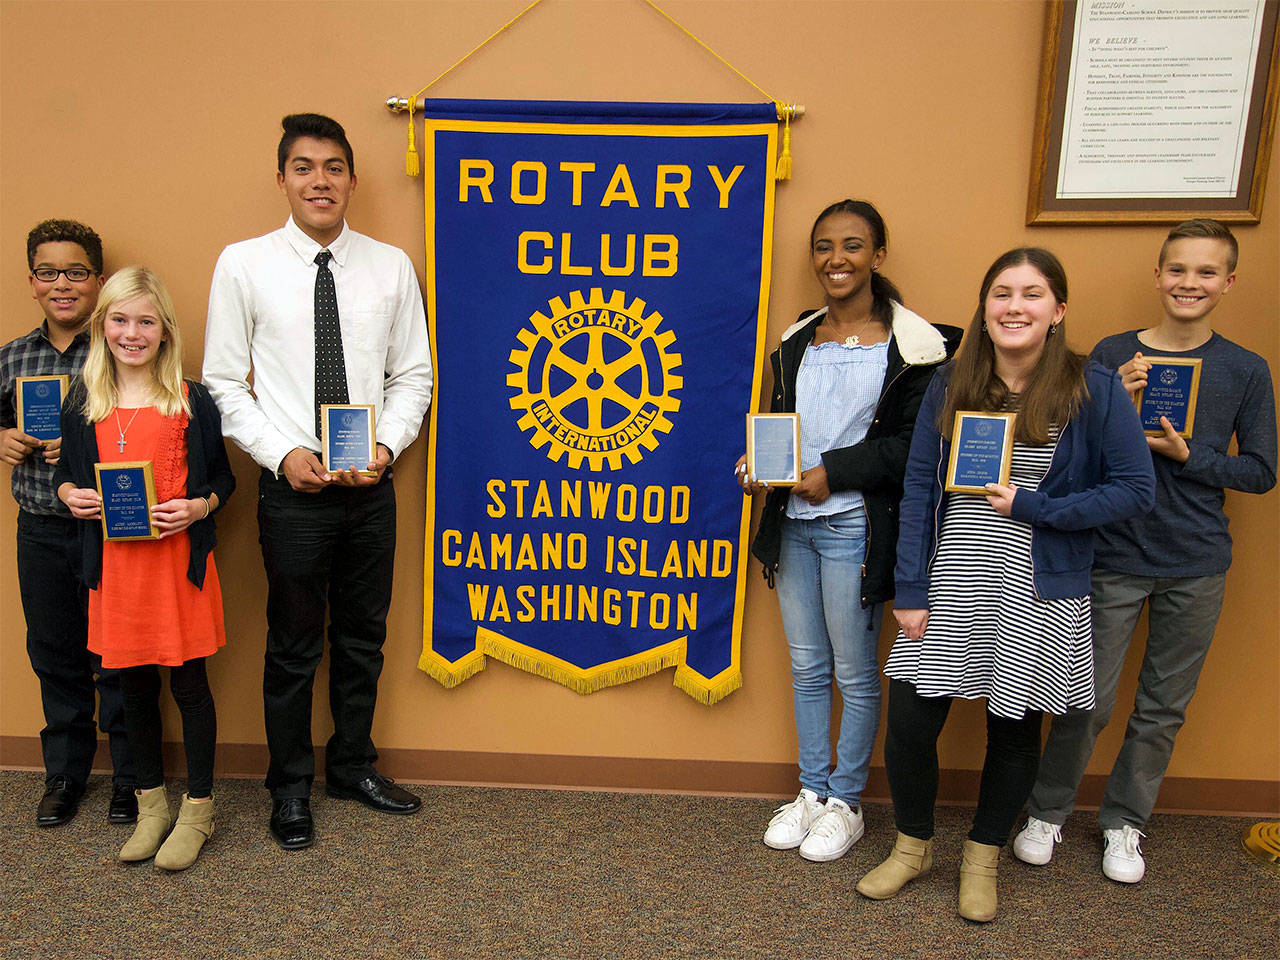 The Rotary Club of Stanwood-Camano Island honored students (from left) Tryoten Mangold, Audrey McDermott, Christian Banuelos-Ornelas, Gadisse Maier, Lydia Colvin and Caden Houston. (Contributed photo)